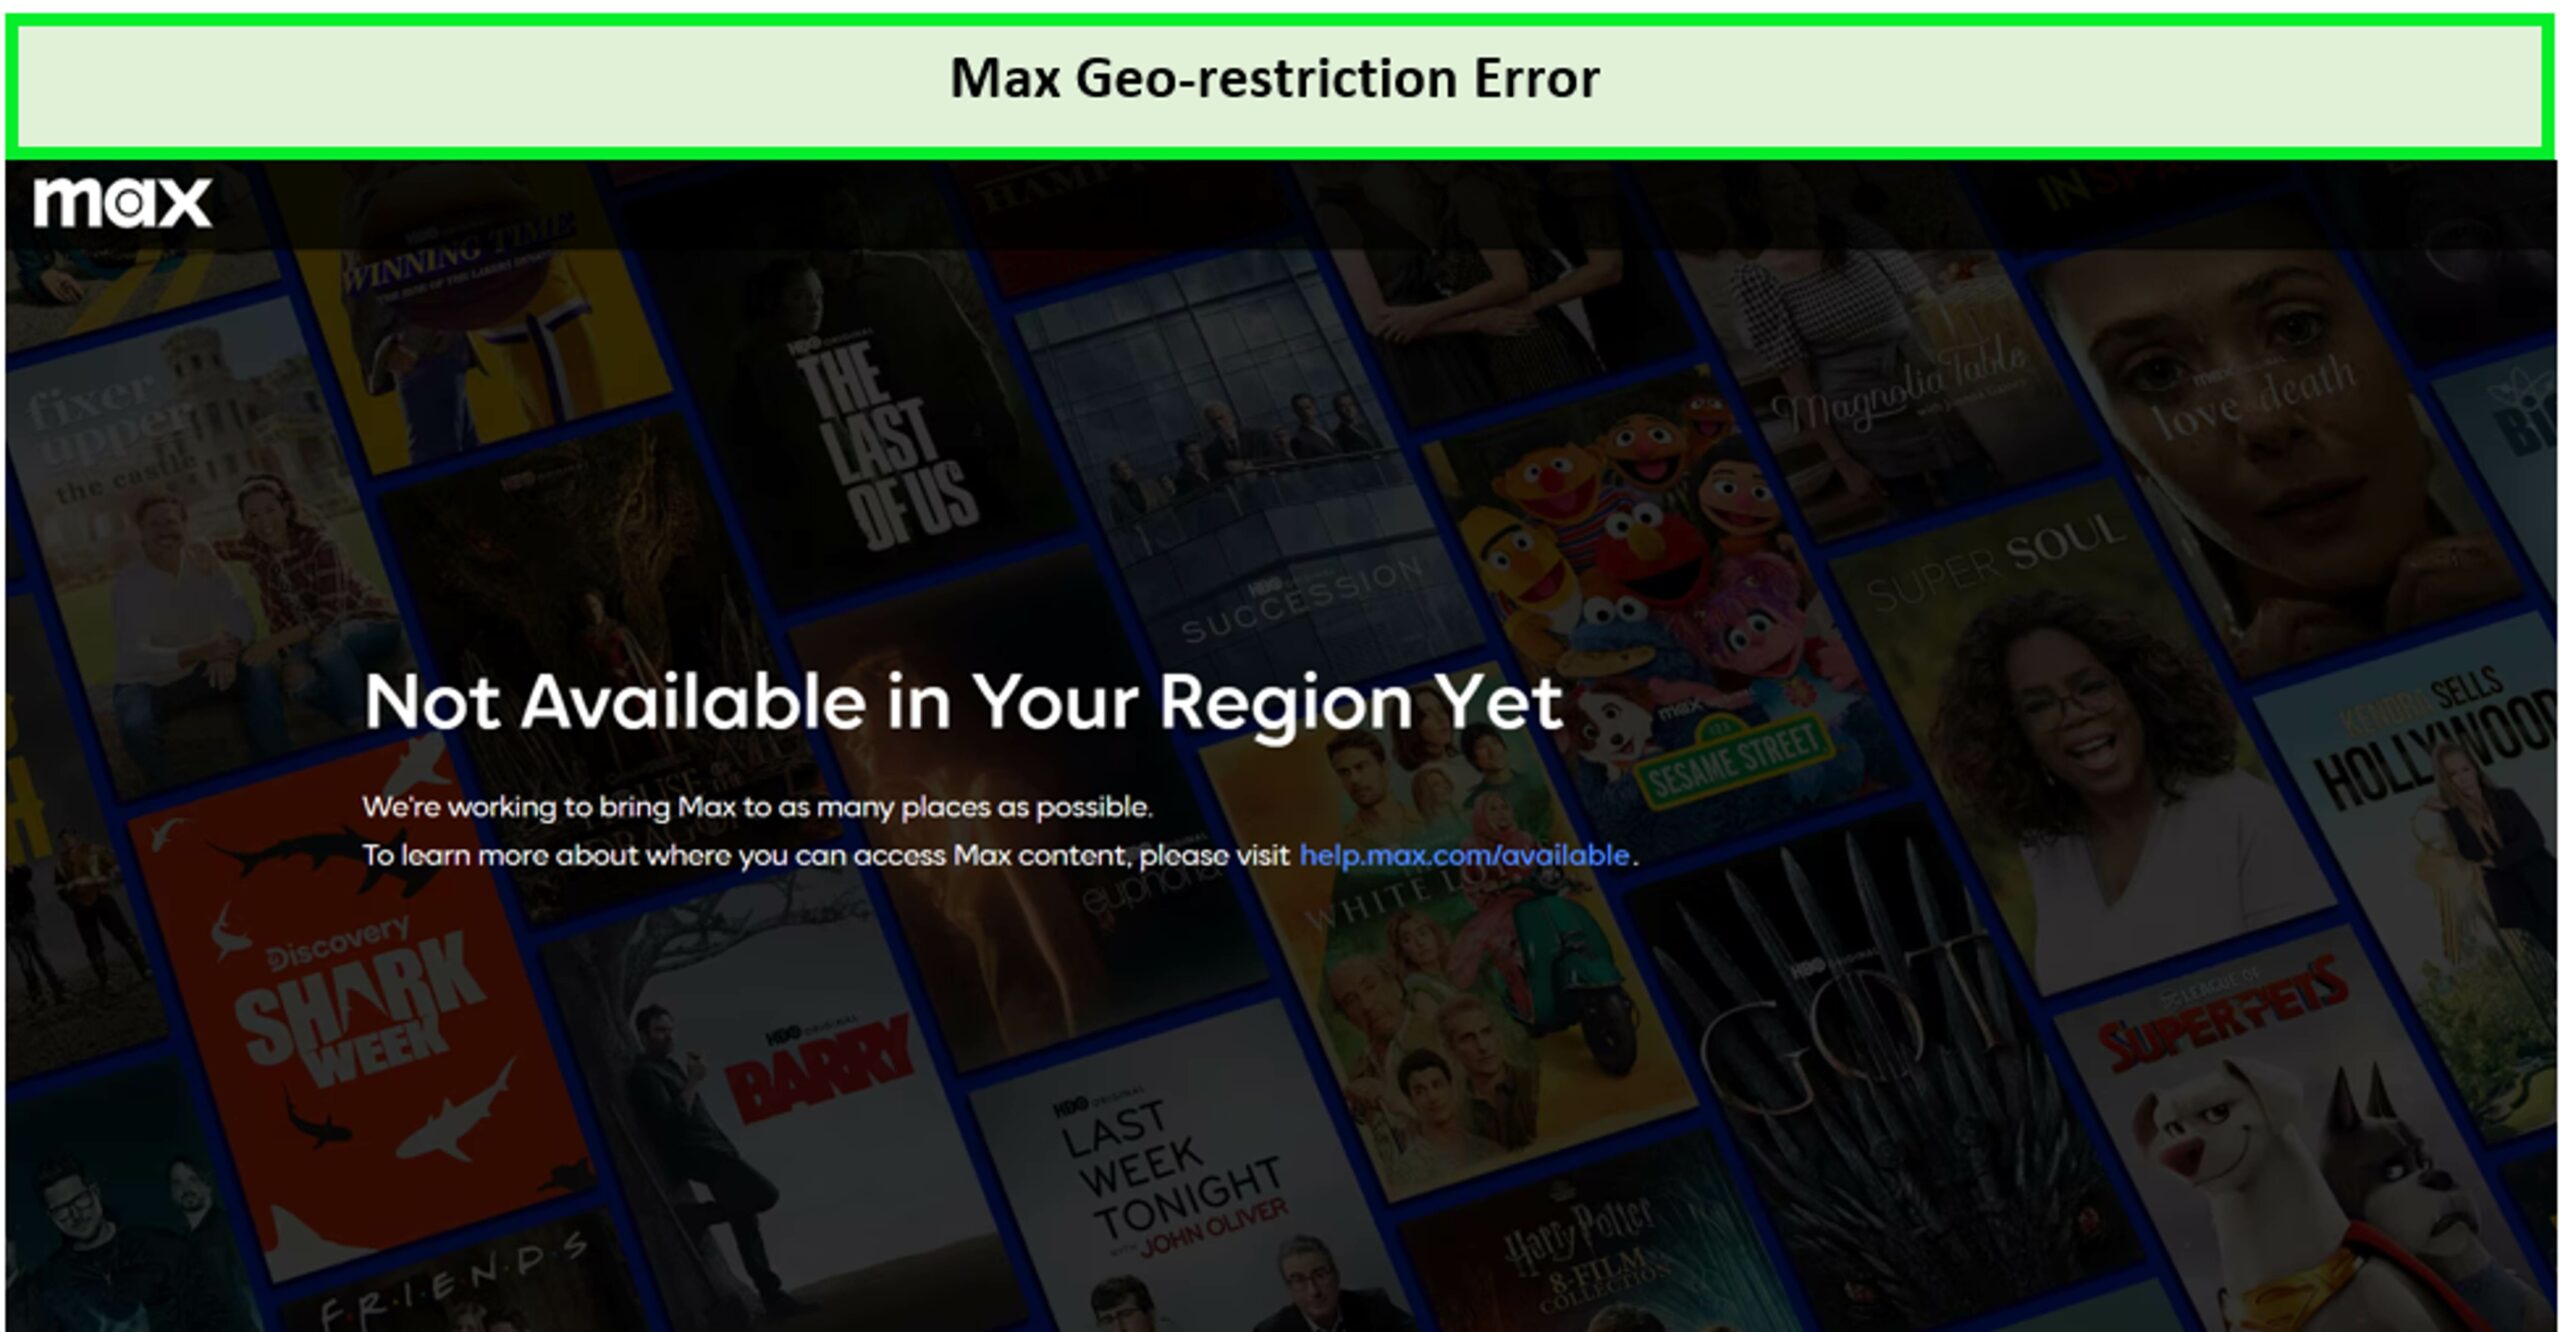 HBO-Max-geo-restriction-error-in-mexico